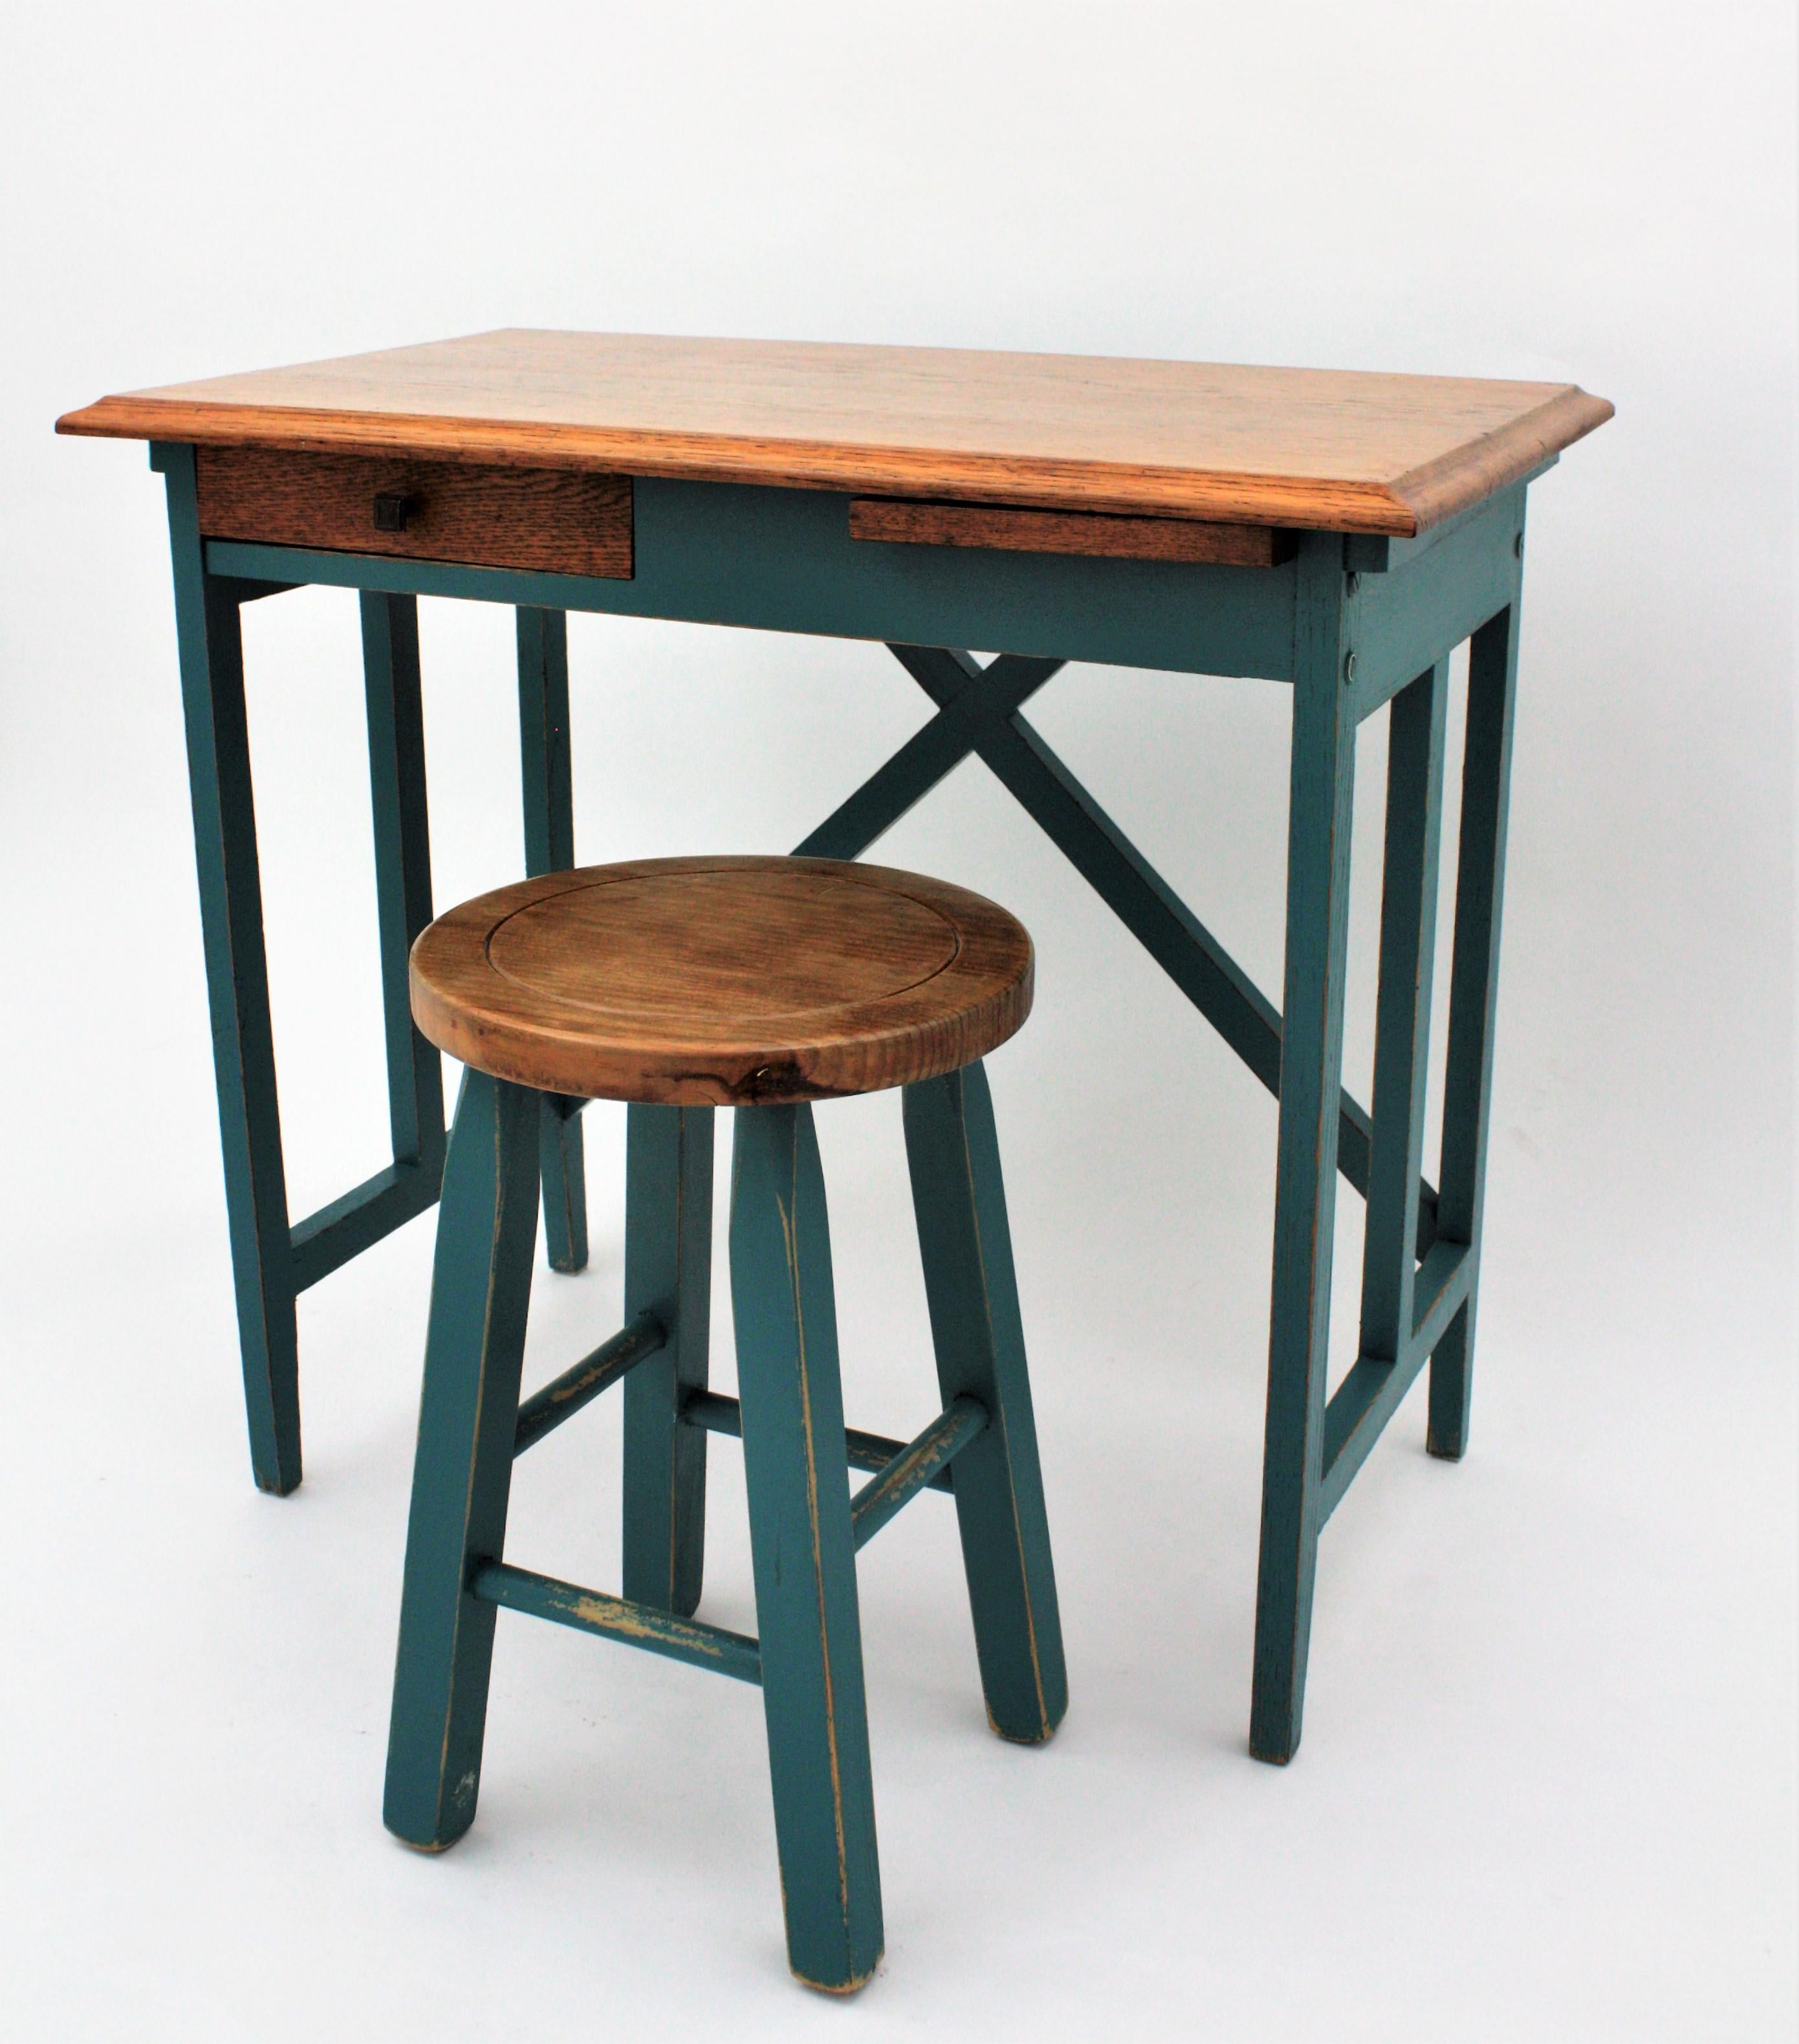 20th Century Spanish Desk and Stool in Oak with Green Blue Patina, 1930s For Sale